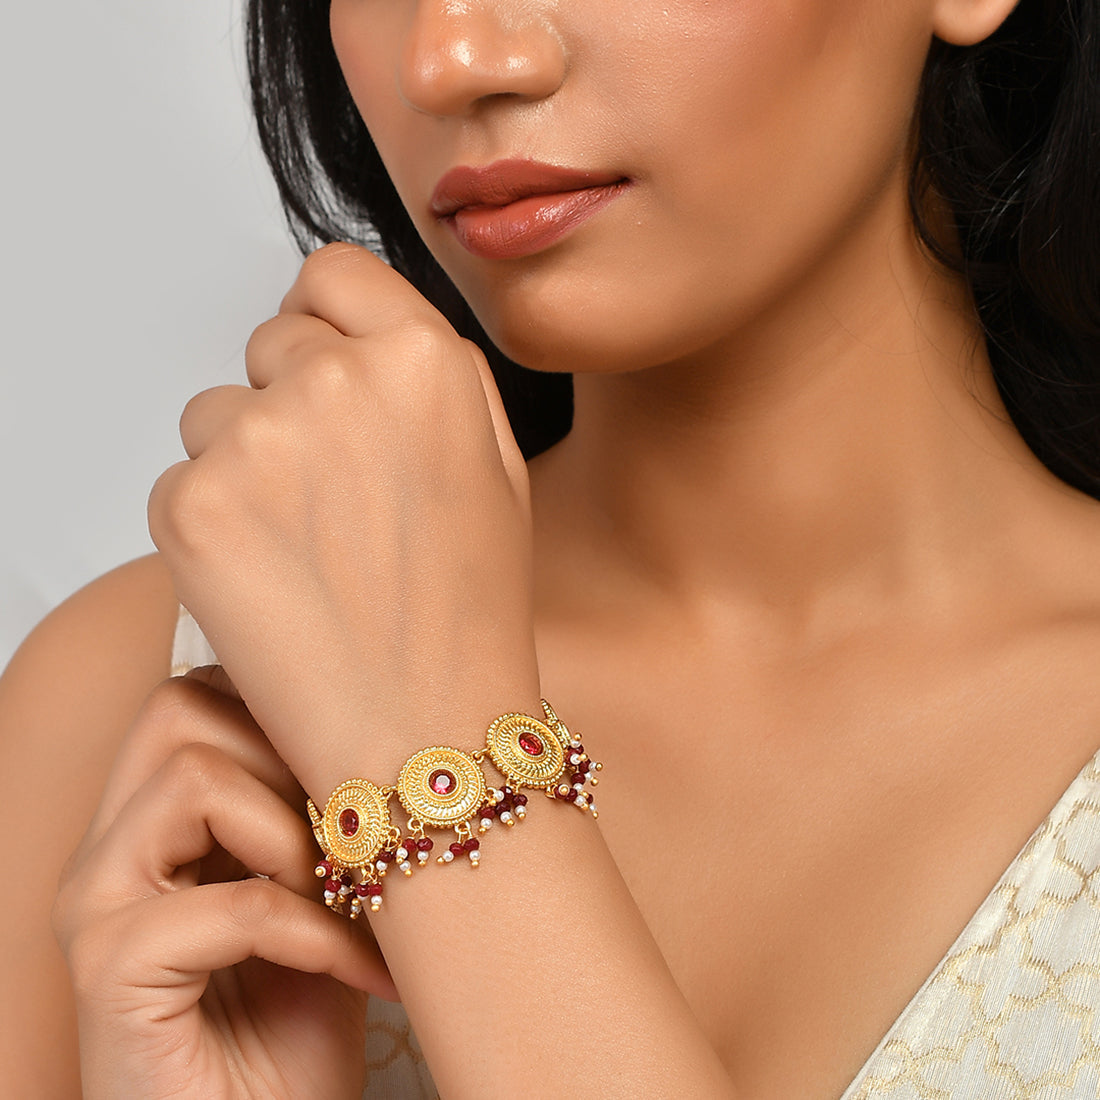 Women's Abharan Gold Plated Red Stones And Pearls Bracelet - Voylla